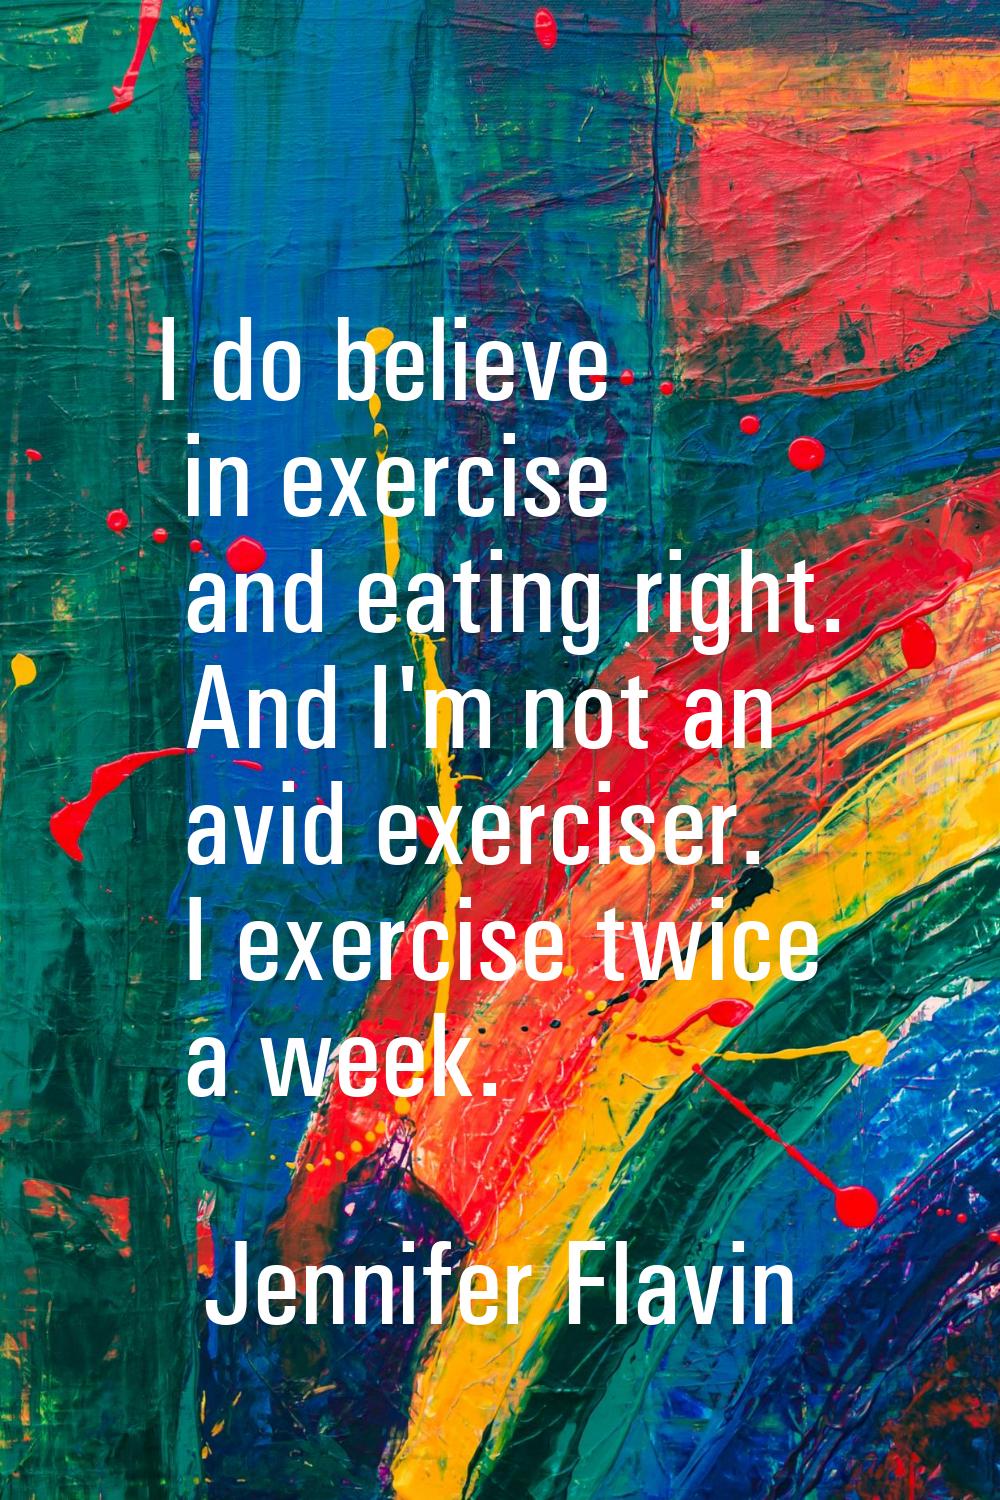 I do believe in exercise and eating right. And I'm not an avid exerciser. I exercise twice a week.